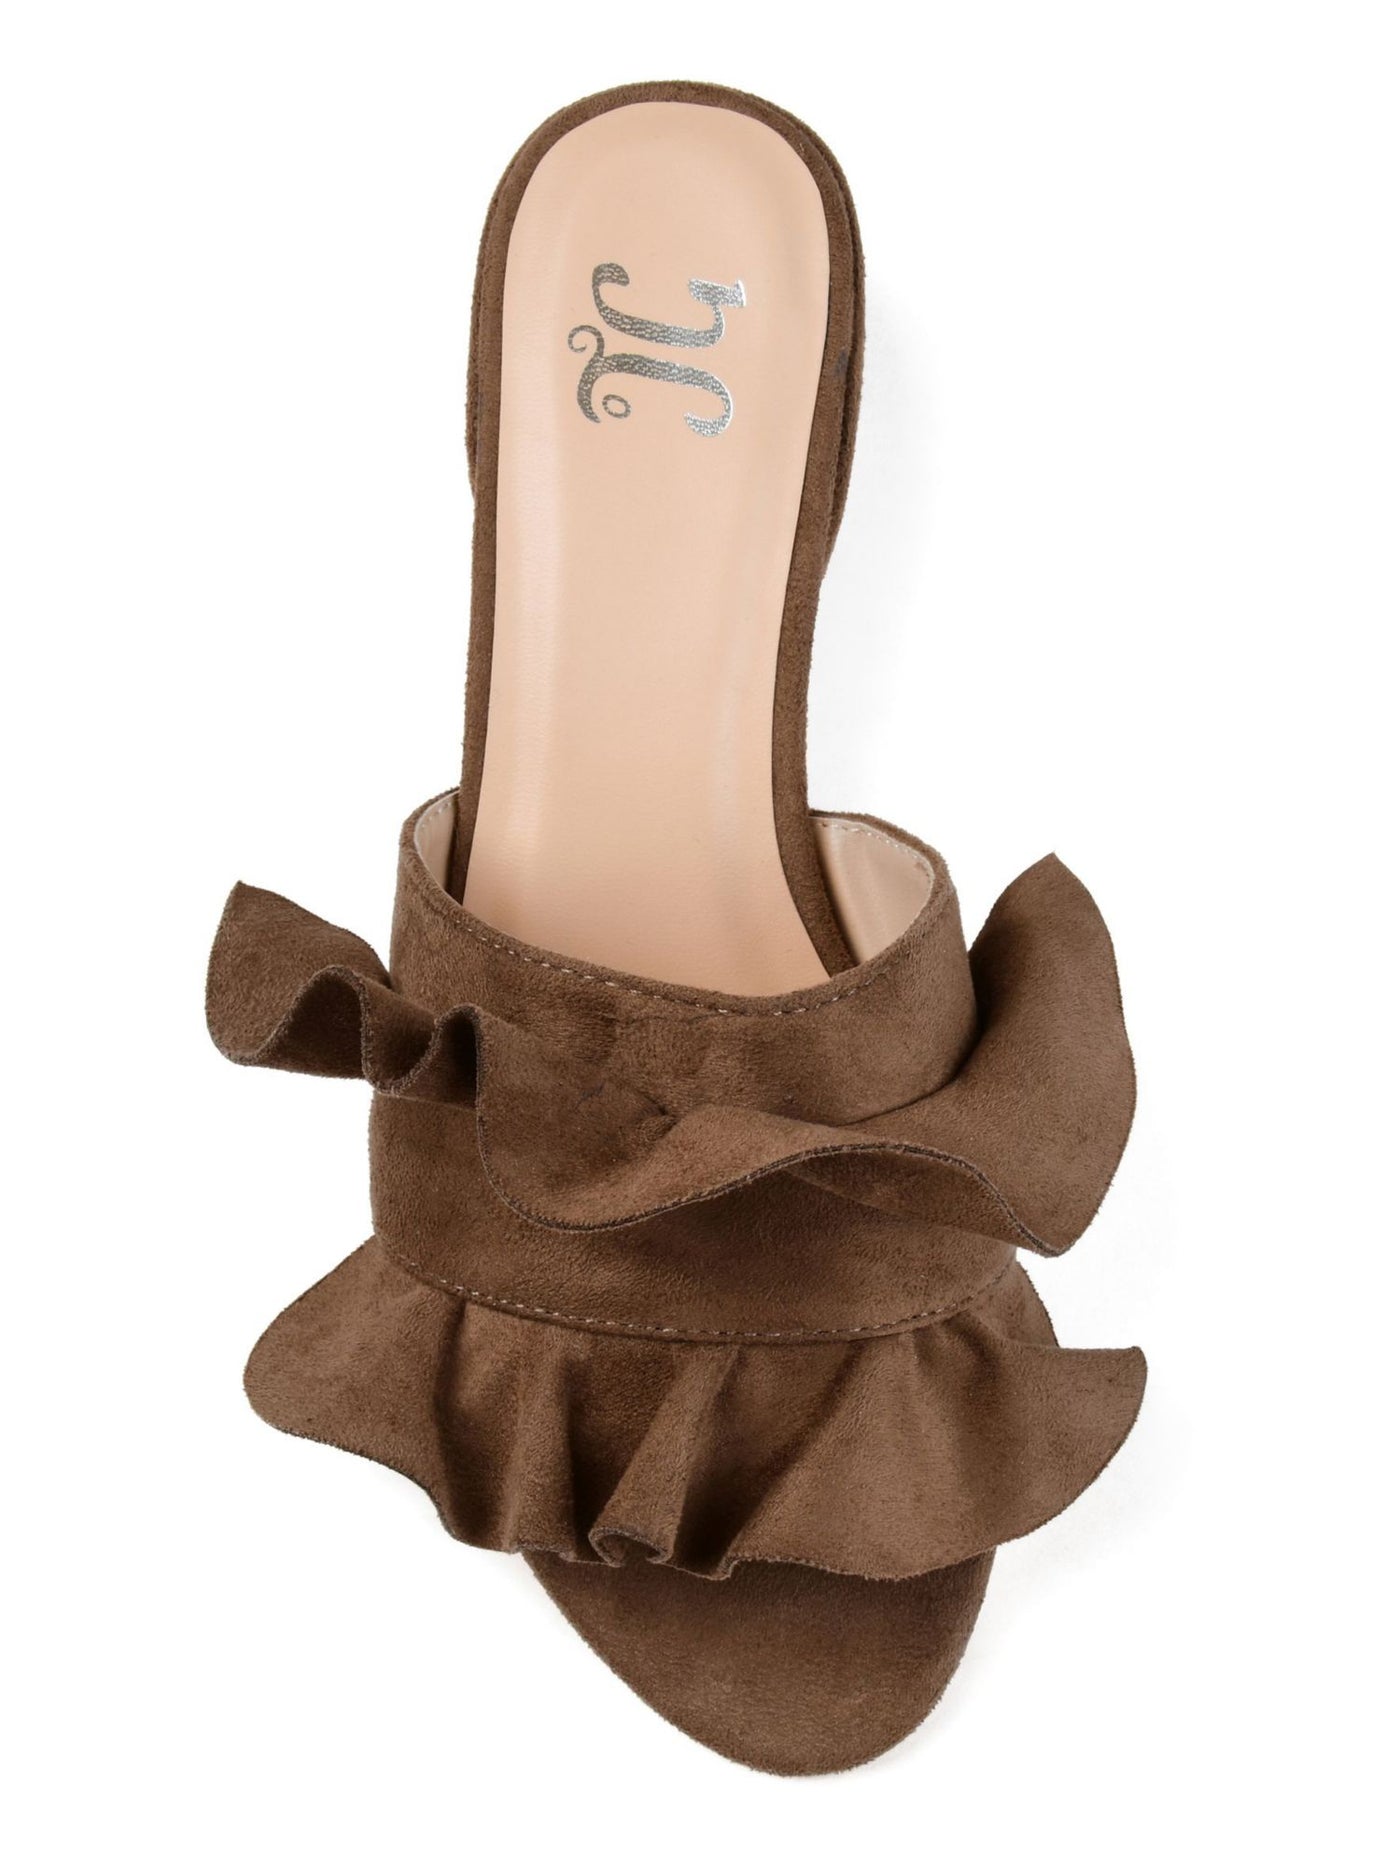 JOURNEE COLLECTION Womens Brown Ruffled Cushioned Sabica Round Toe Block Heel Slip On Heeled Mules Shoes 7.5 M